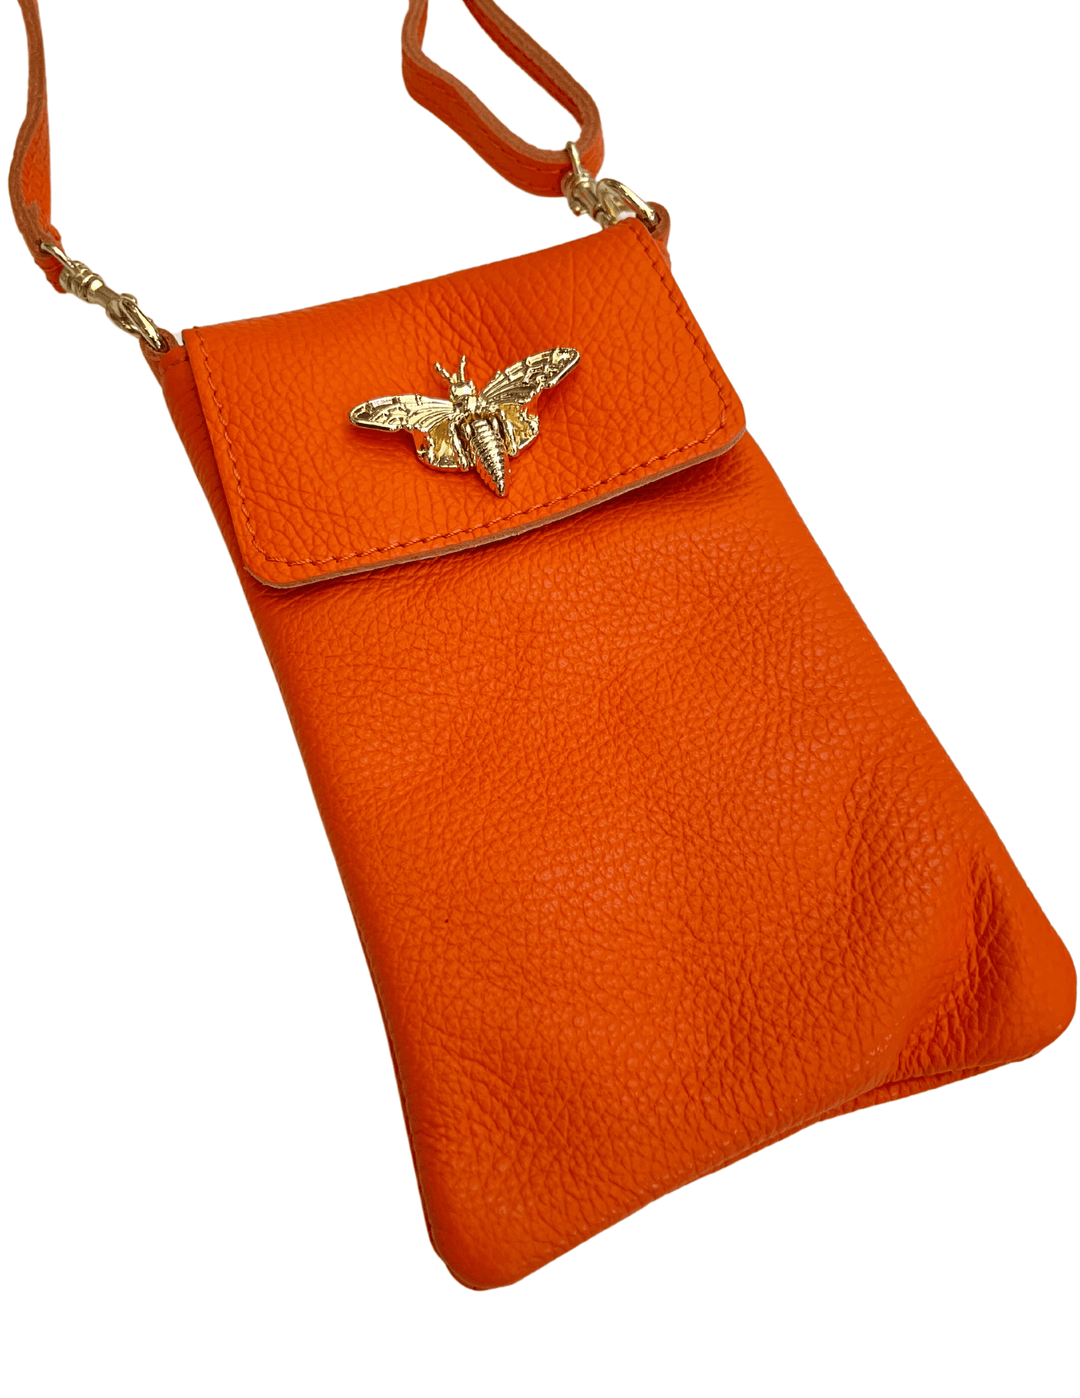 gift boutique near me for women leather phone bee bag orange